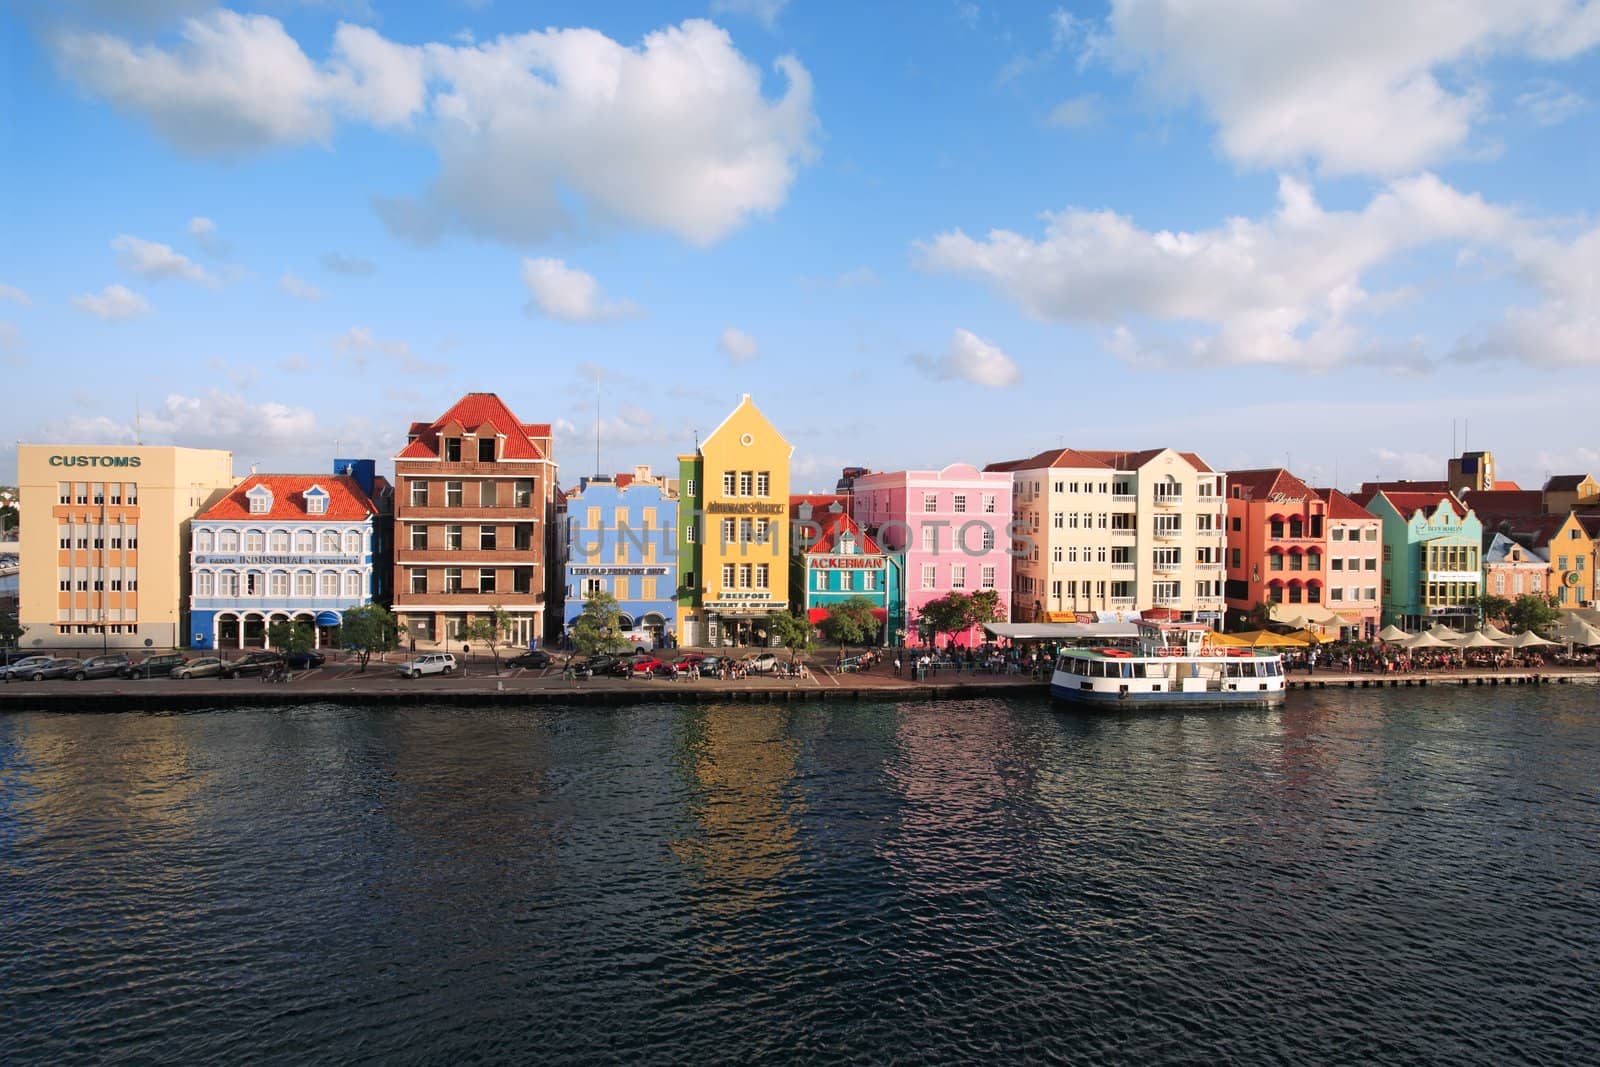 Willemstad, Curacao, Netherlands Antilles - October 15, 2010: Colourful houses and commercial buildings of Punda, Willemstad Harbor, on the island of Curacao, Netherlands Antilles.